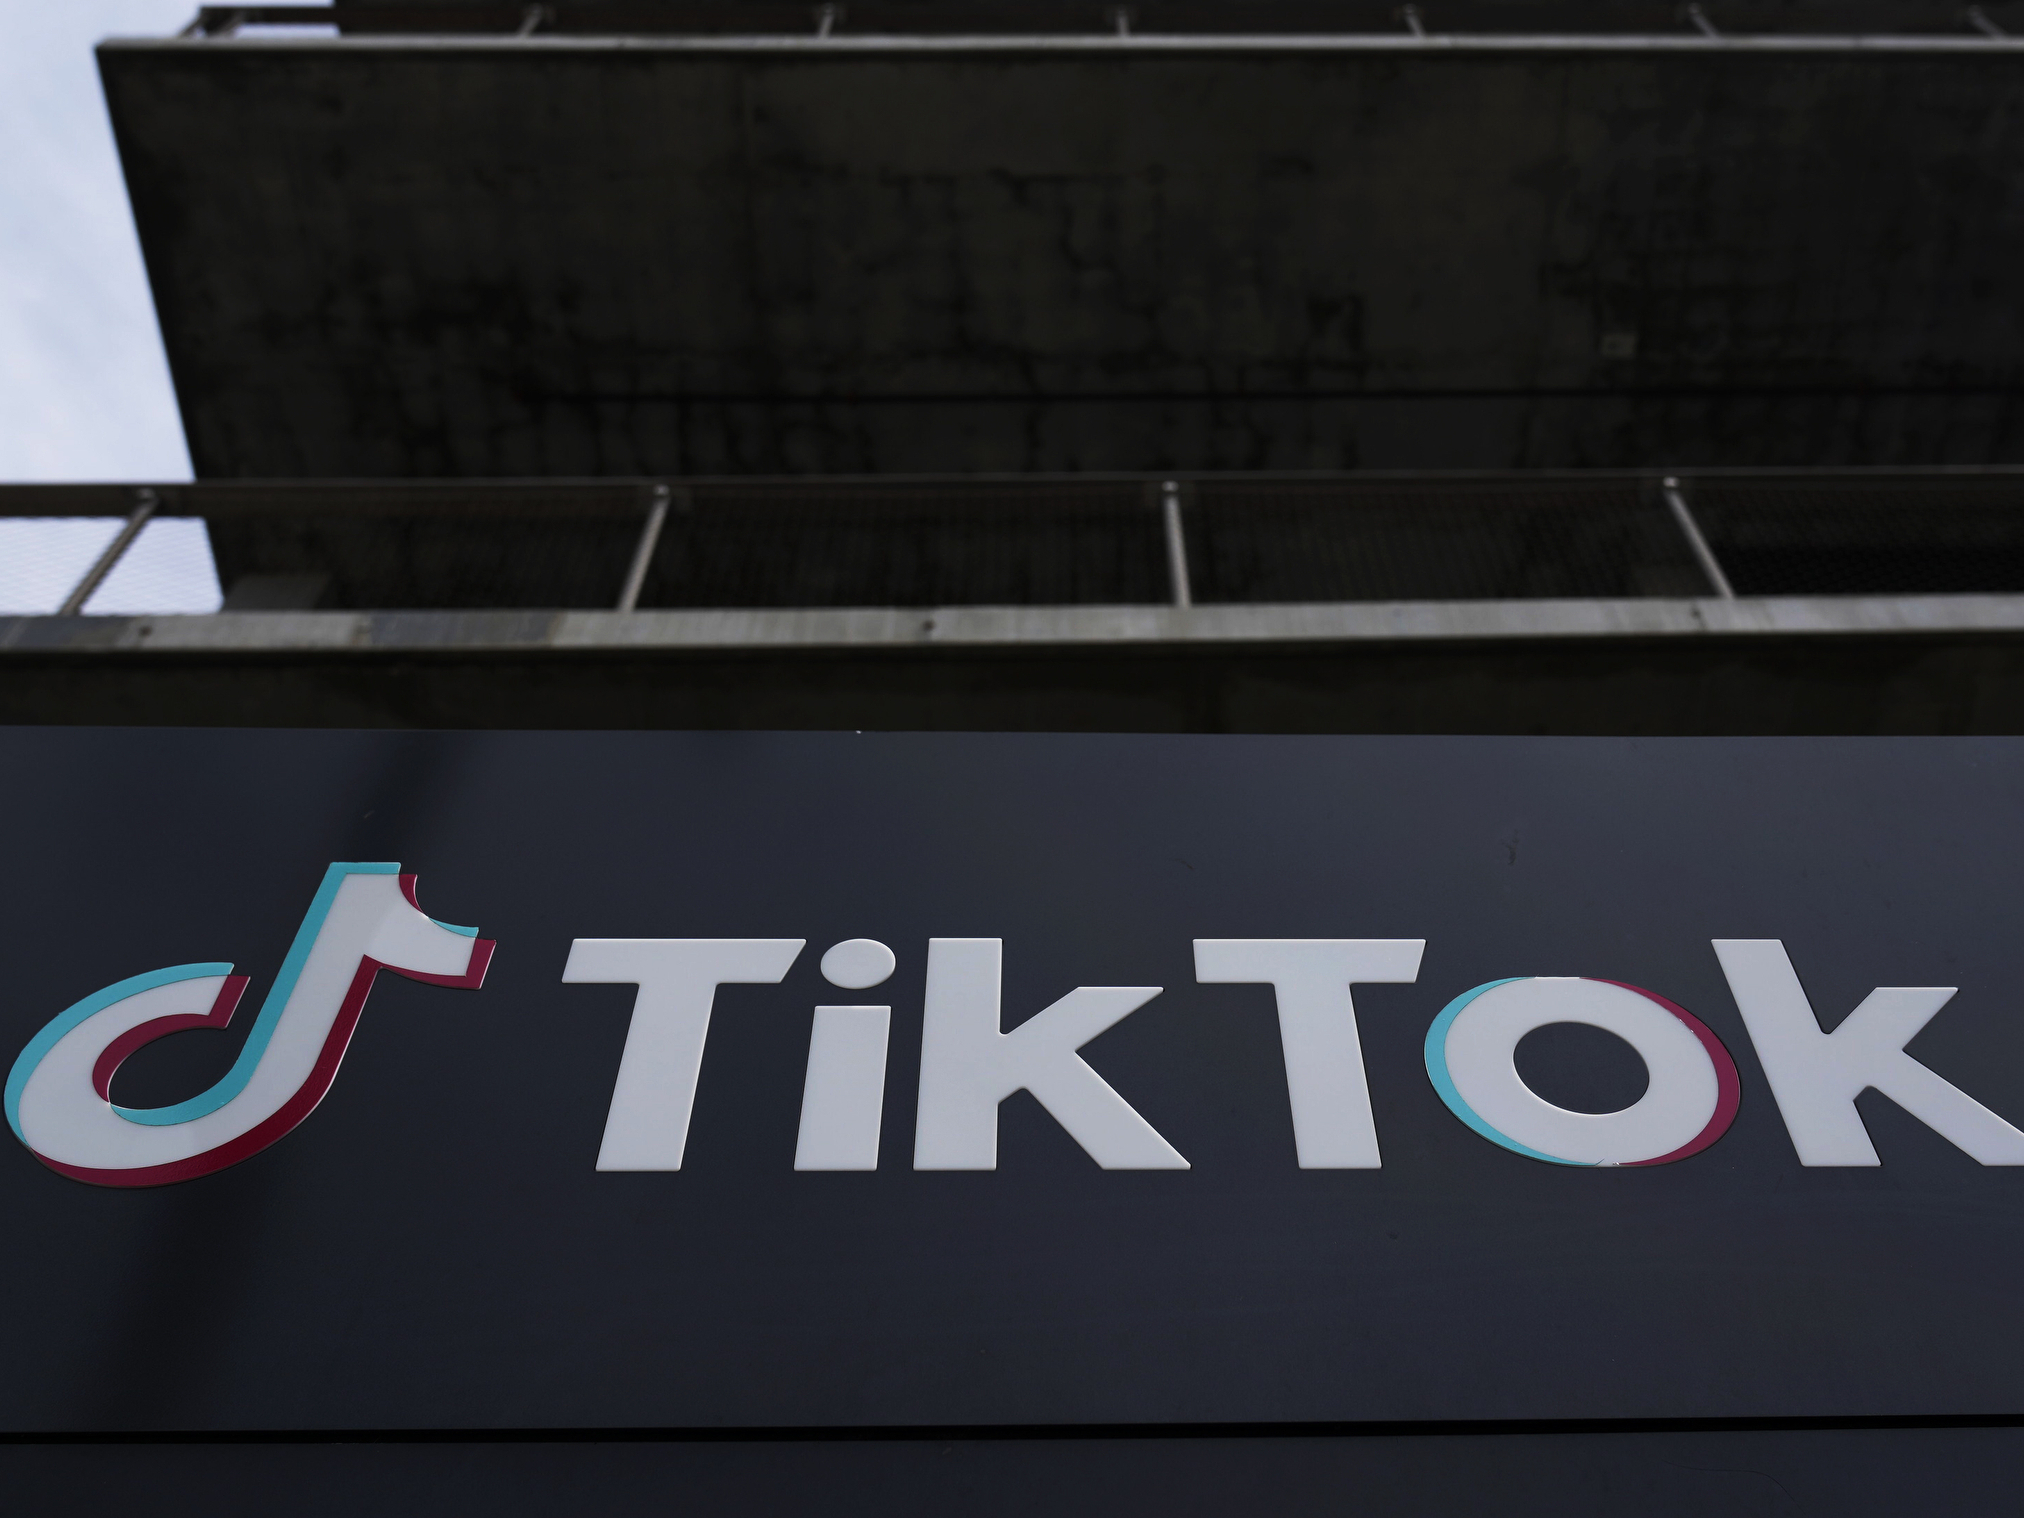 TikTok ban expected to become law, but it’s not so simple. What’s next?